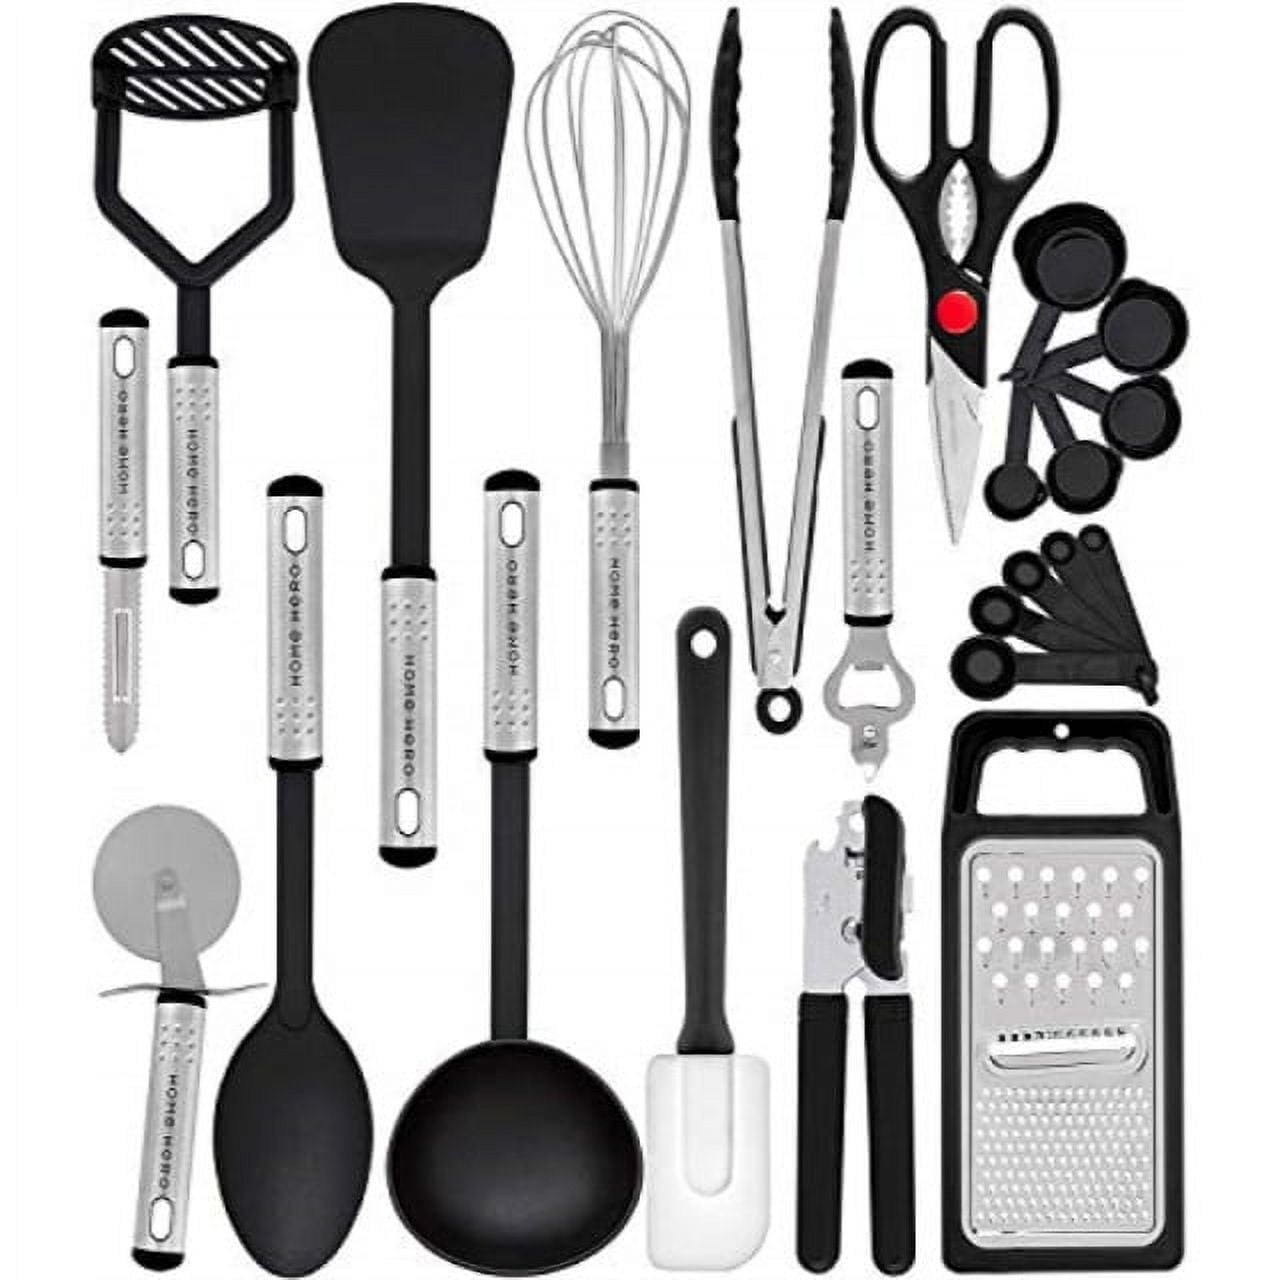 Heavy Duty Kitchen Utensils Set, 6 PC Nonstick Nylon, High Heat Resistant for Stovetop and Griddle, 6 Pieces for Cooking (Orange) by DFACKTO